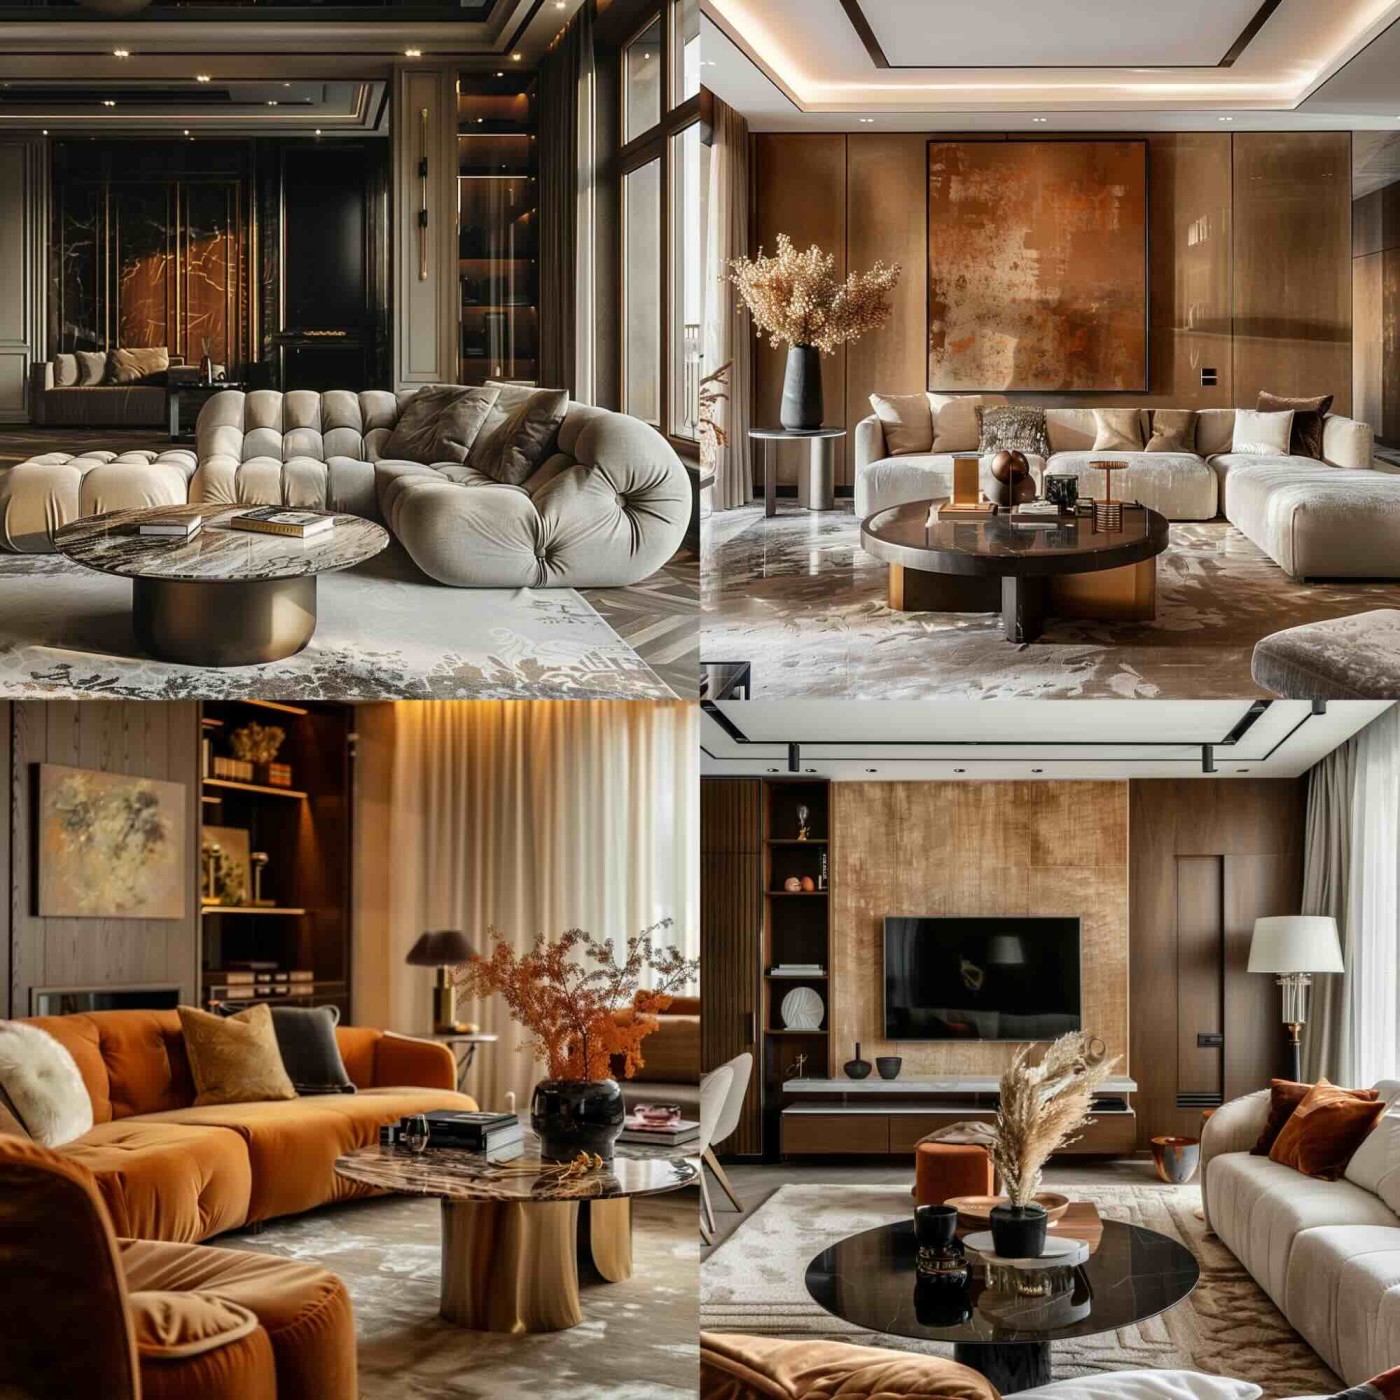 A living room in a luxury apartment, warm tones